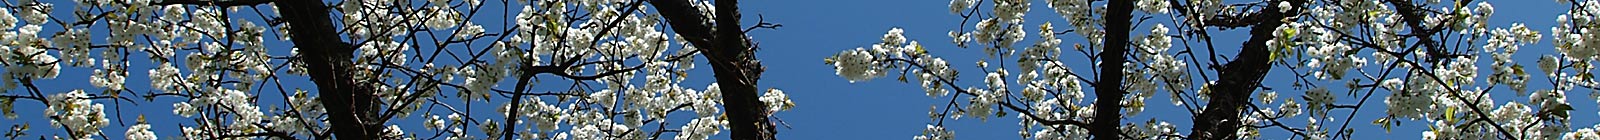 Easter, an old Cherry Tree in full blossom - Banner